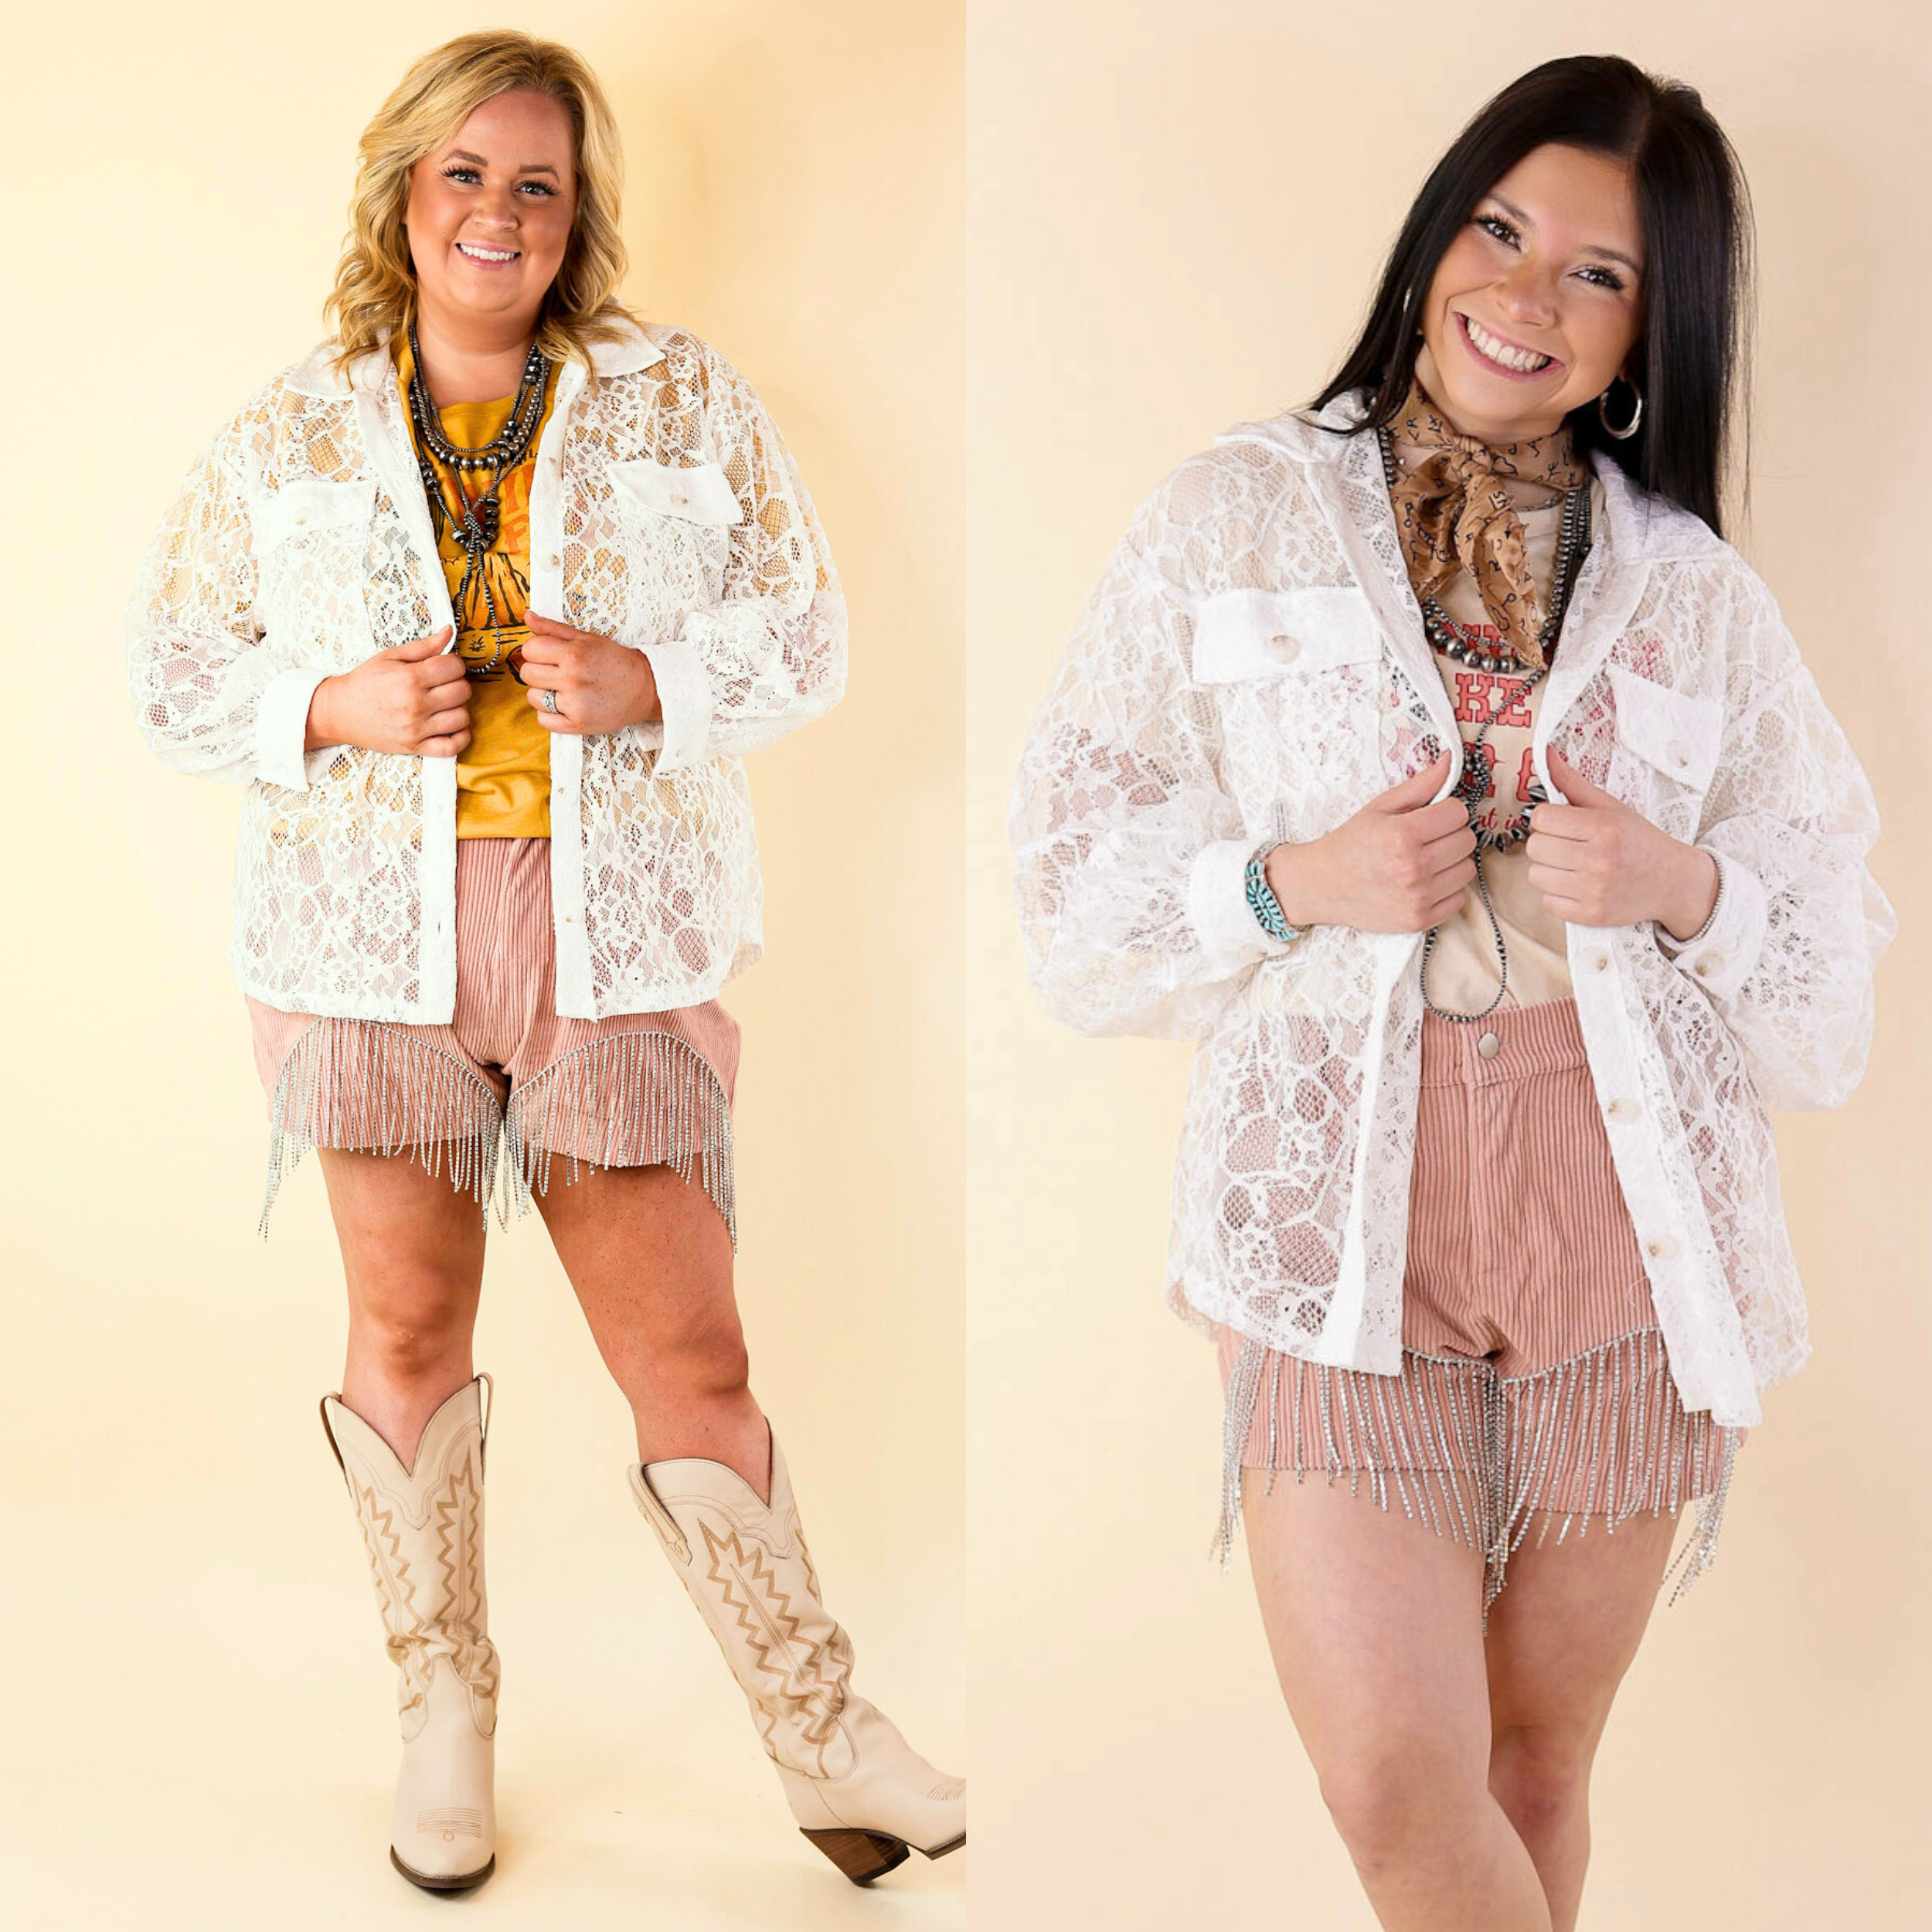 Sheer Chic Collared Button Up Lace Top in White - Giddy Up Glamour Boutique